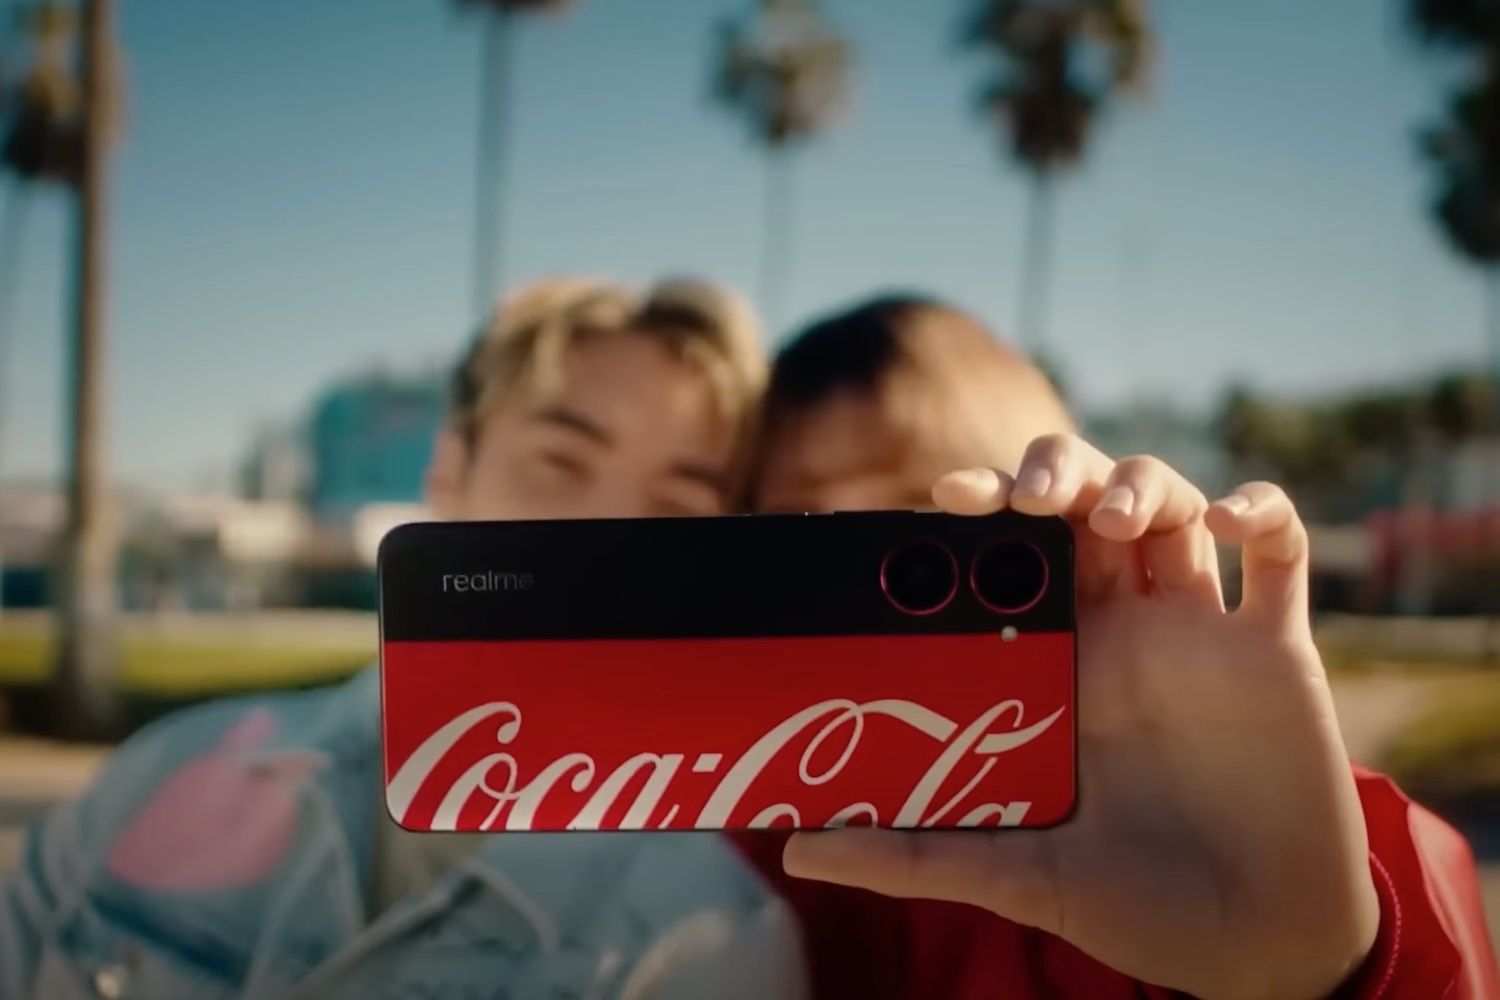 The Realme 10 Pro Coca-Cola Edition will get these special coke-themed customisations